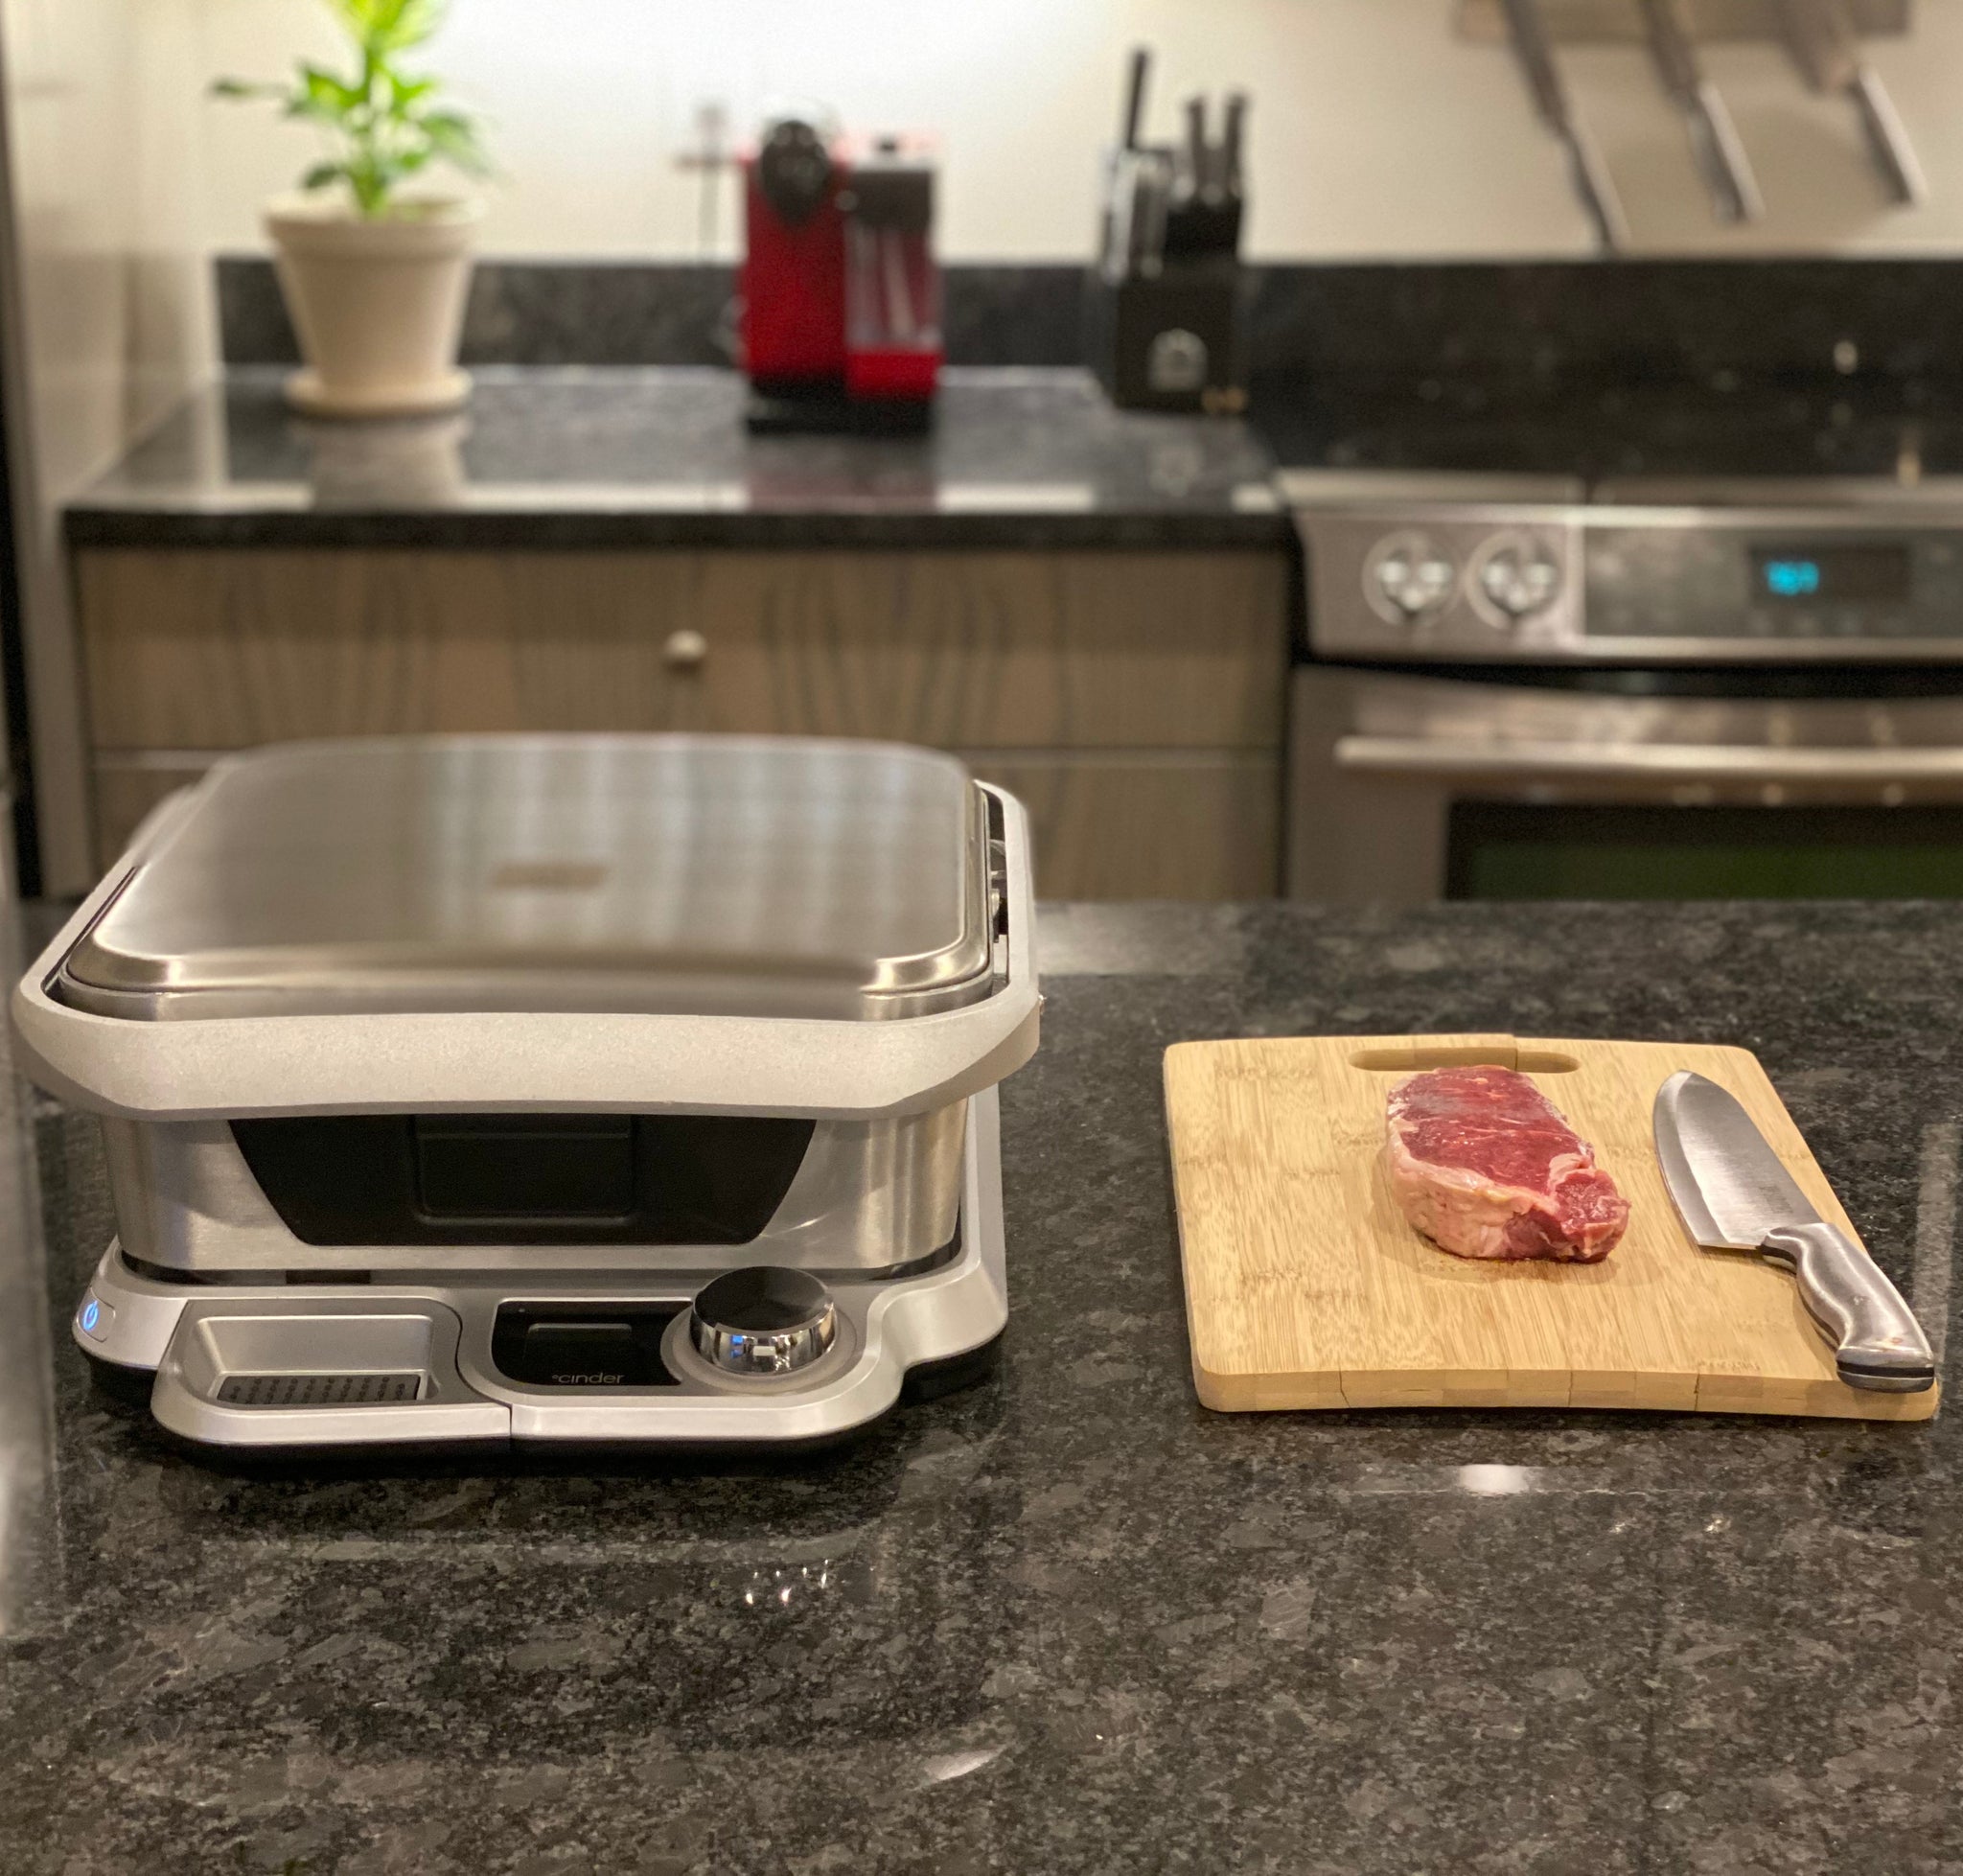 Cinder Grill - How to Choose an Indoor Grill